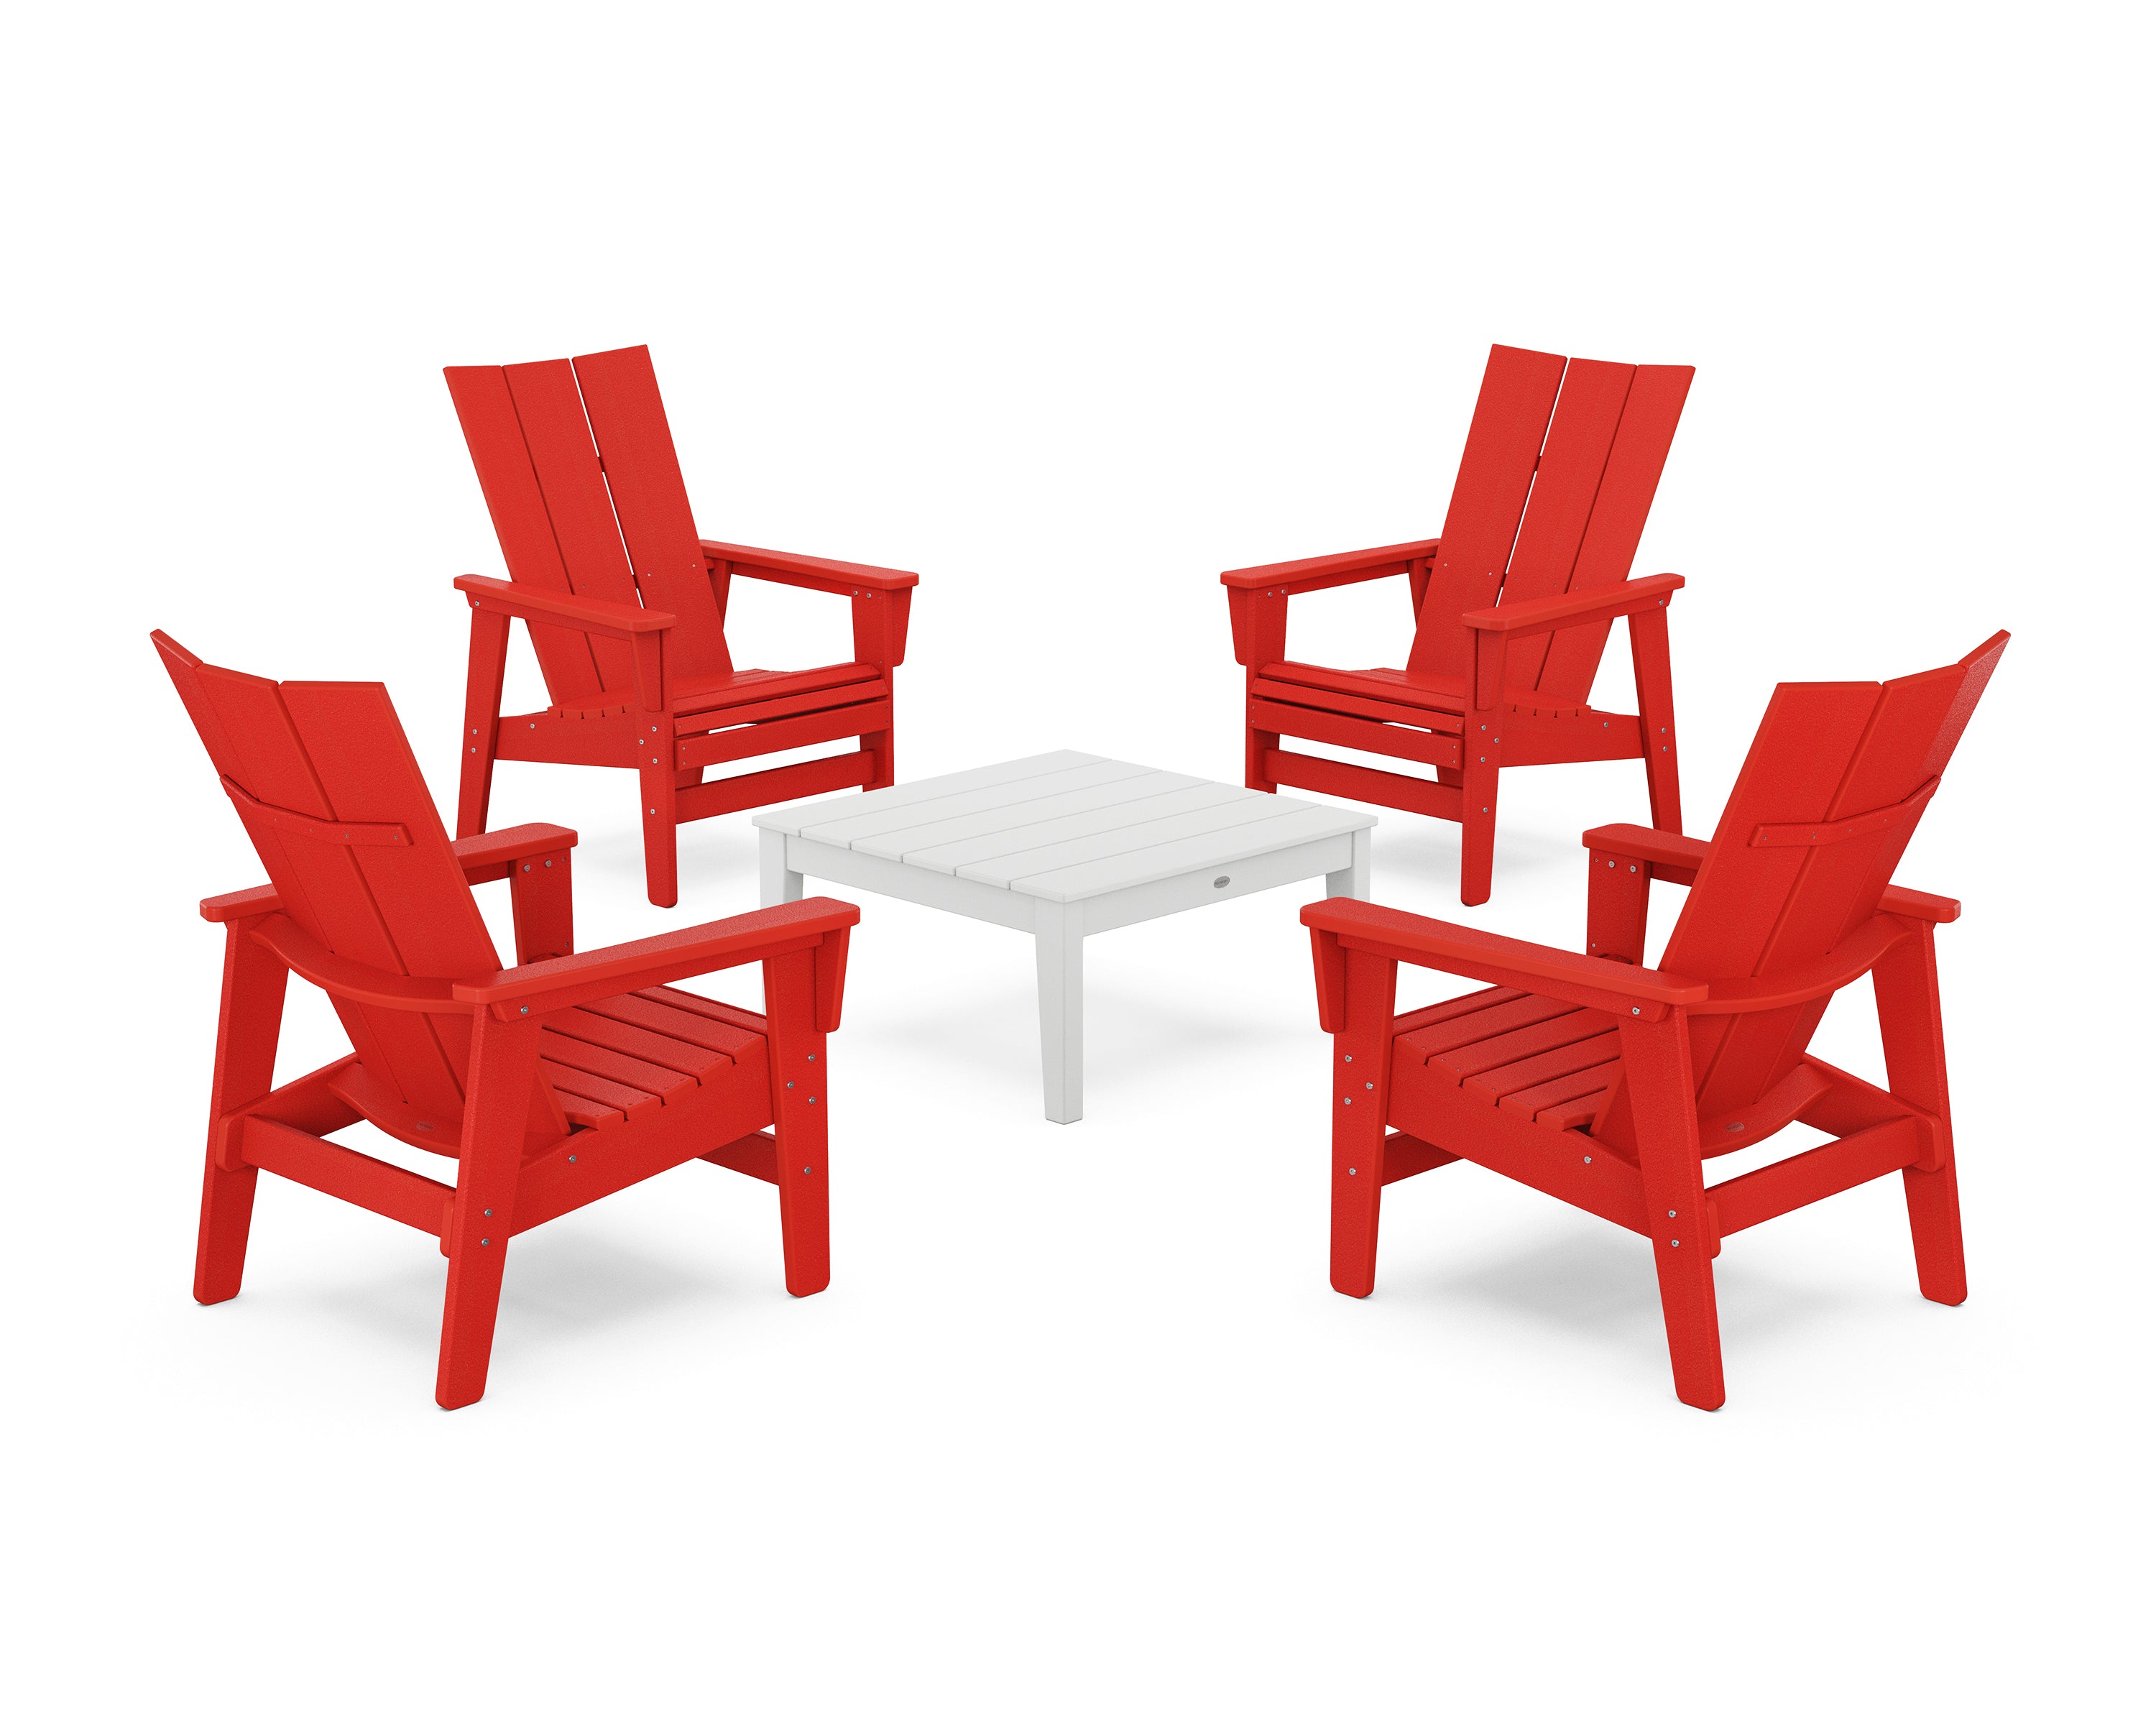 POLYWOOD® 5-Piece Modern Grand Upright Adirondack Chair Conversation Group in Sunset Red / White